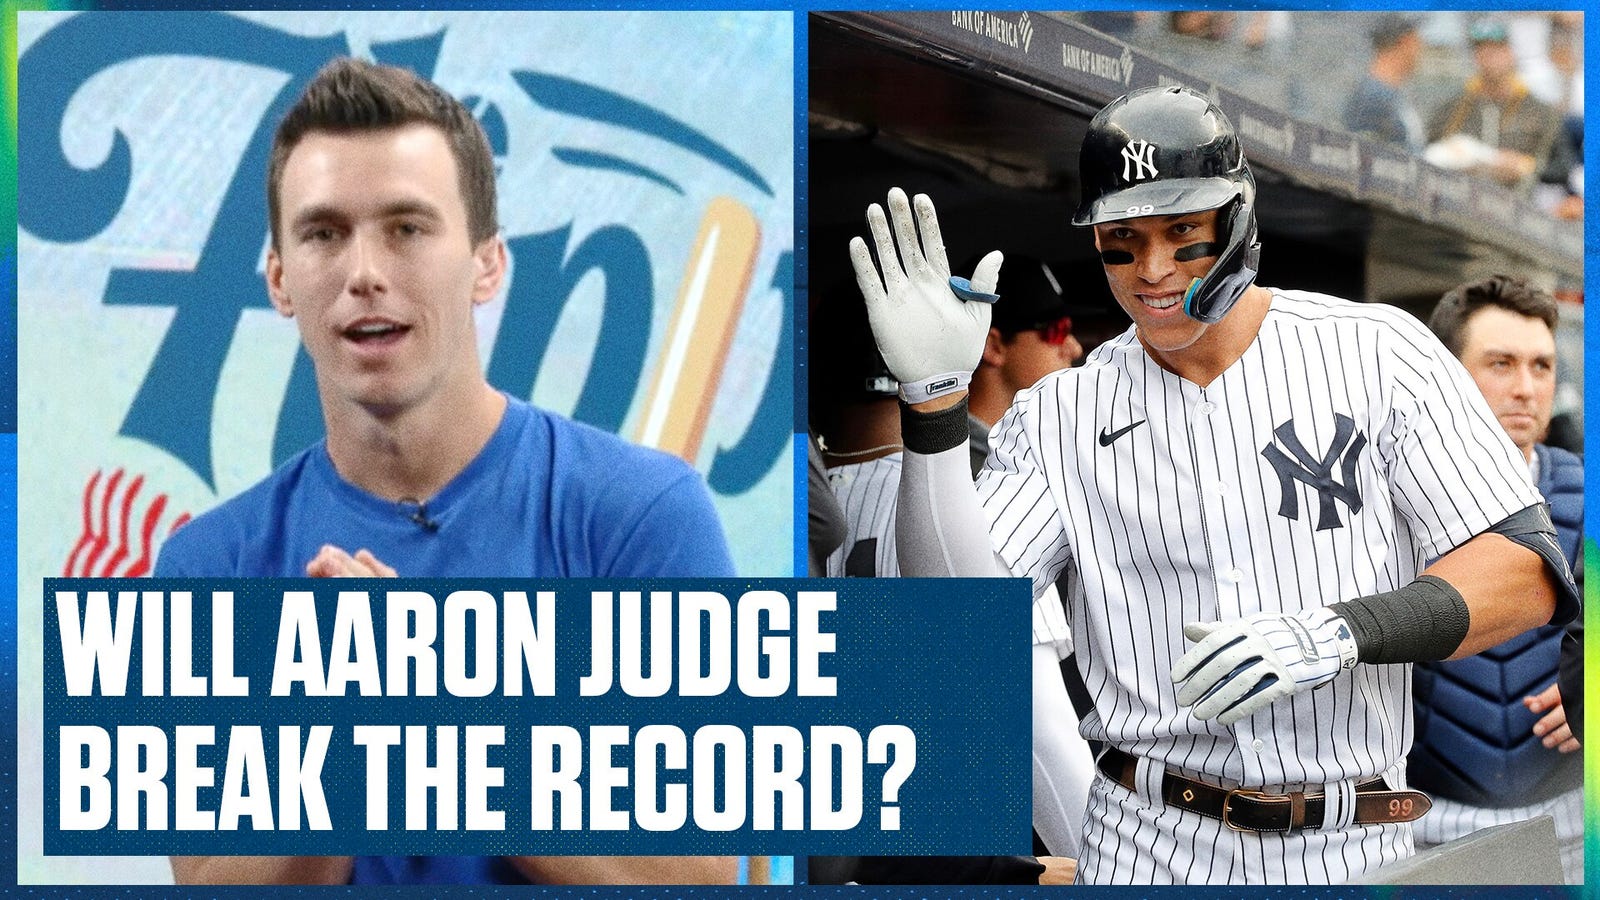 Aaron Judge chases immortality in his pursuit of the Yankees' single season HR record